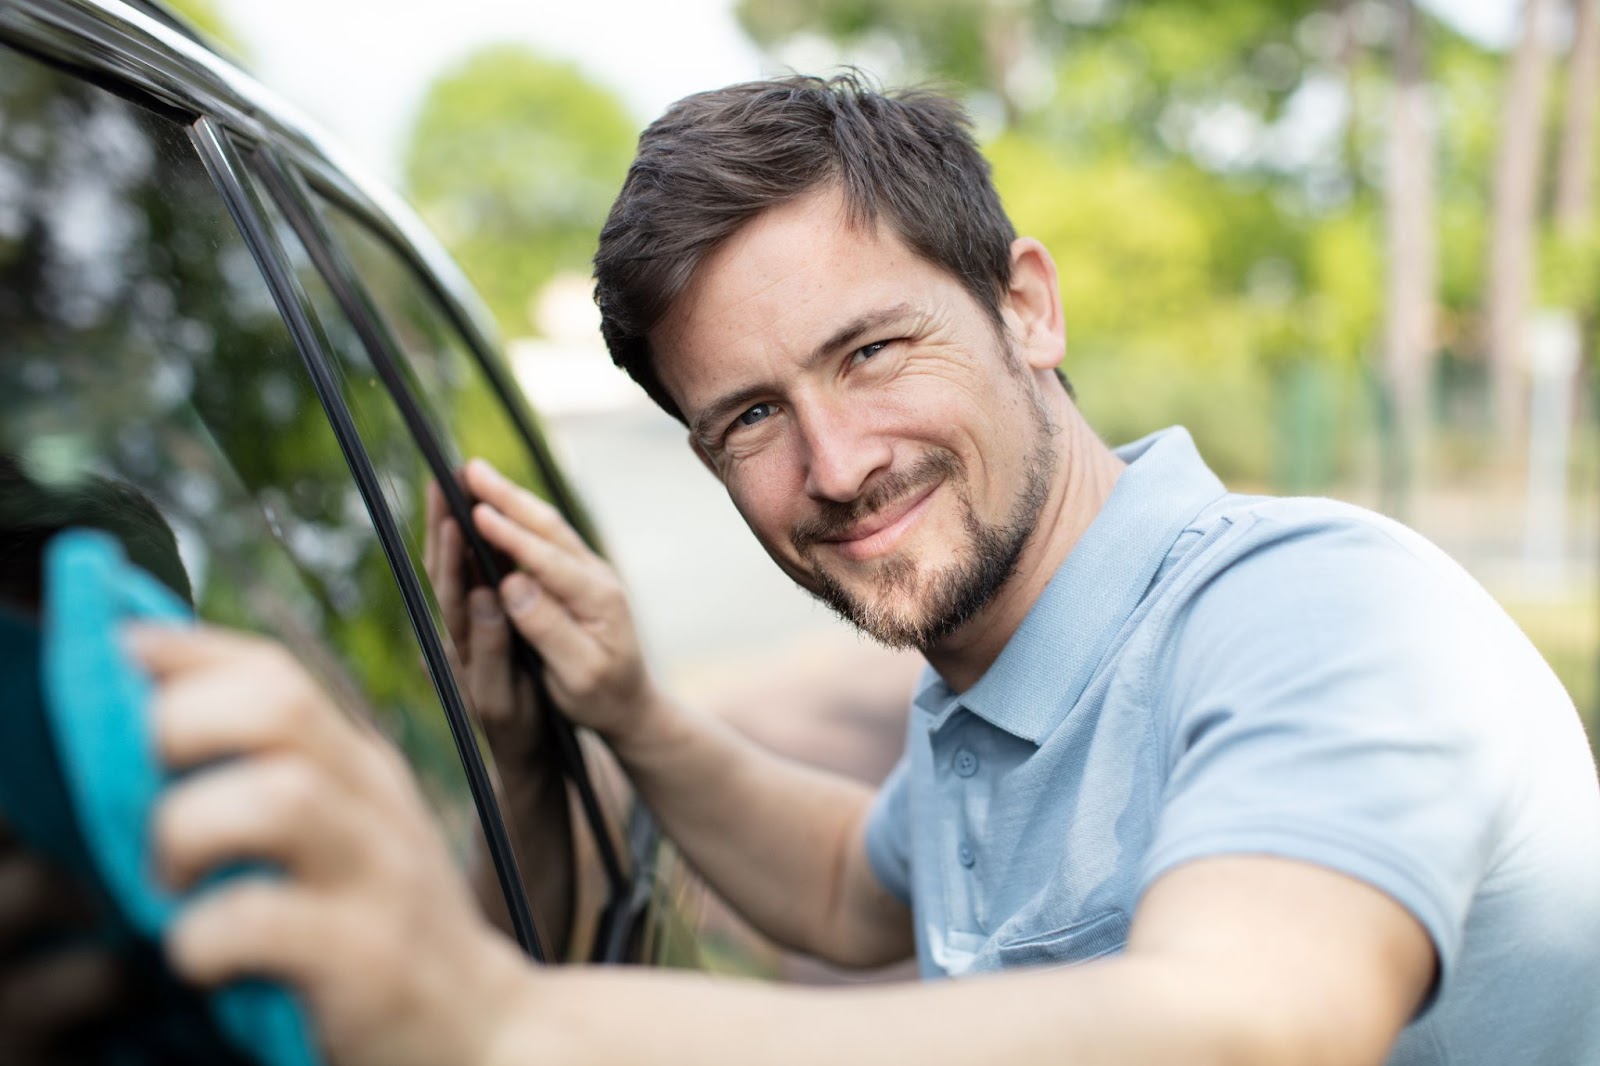 A man cleaning the window of his car, removing adhesive residue, with a windshield repair service in the background.